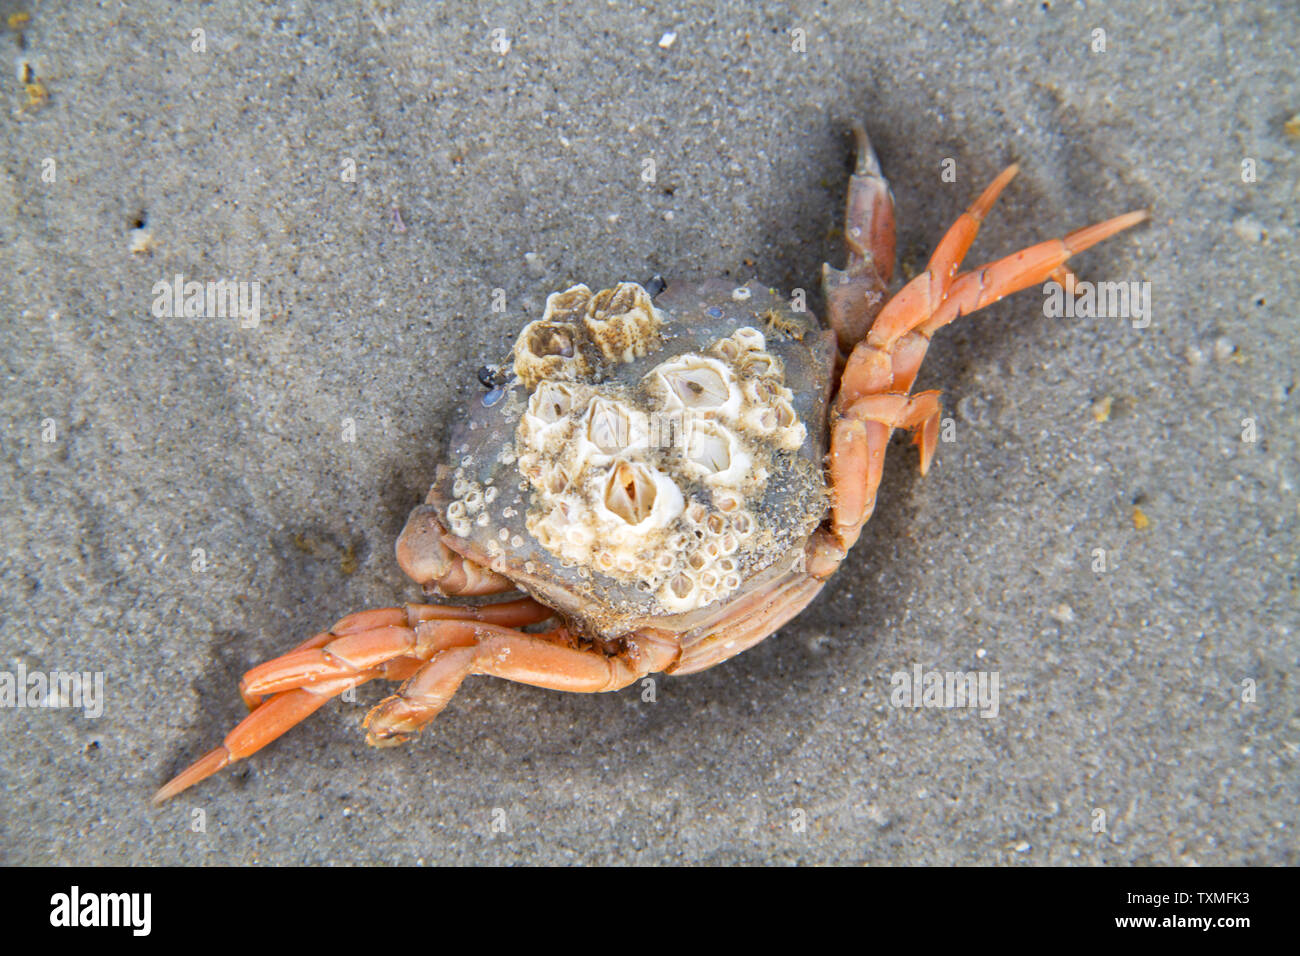 Dead Shore crab, grown with Barnacles, on the sand of the beach Stock Photo